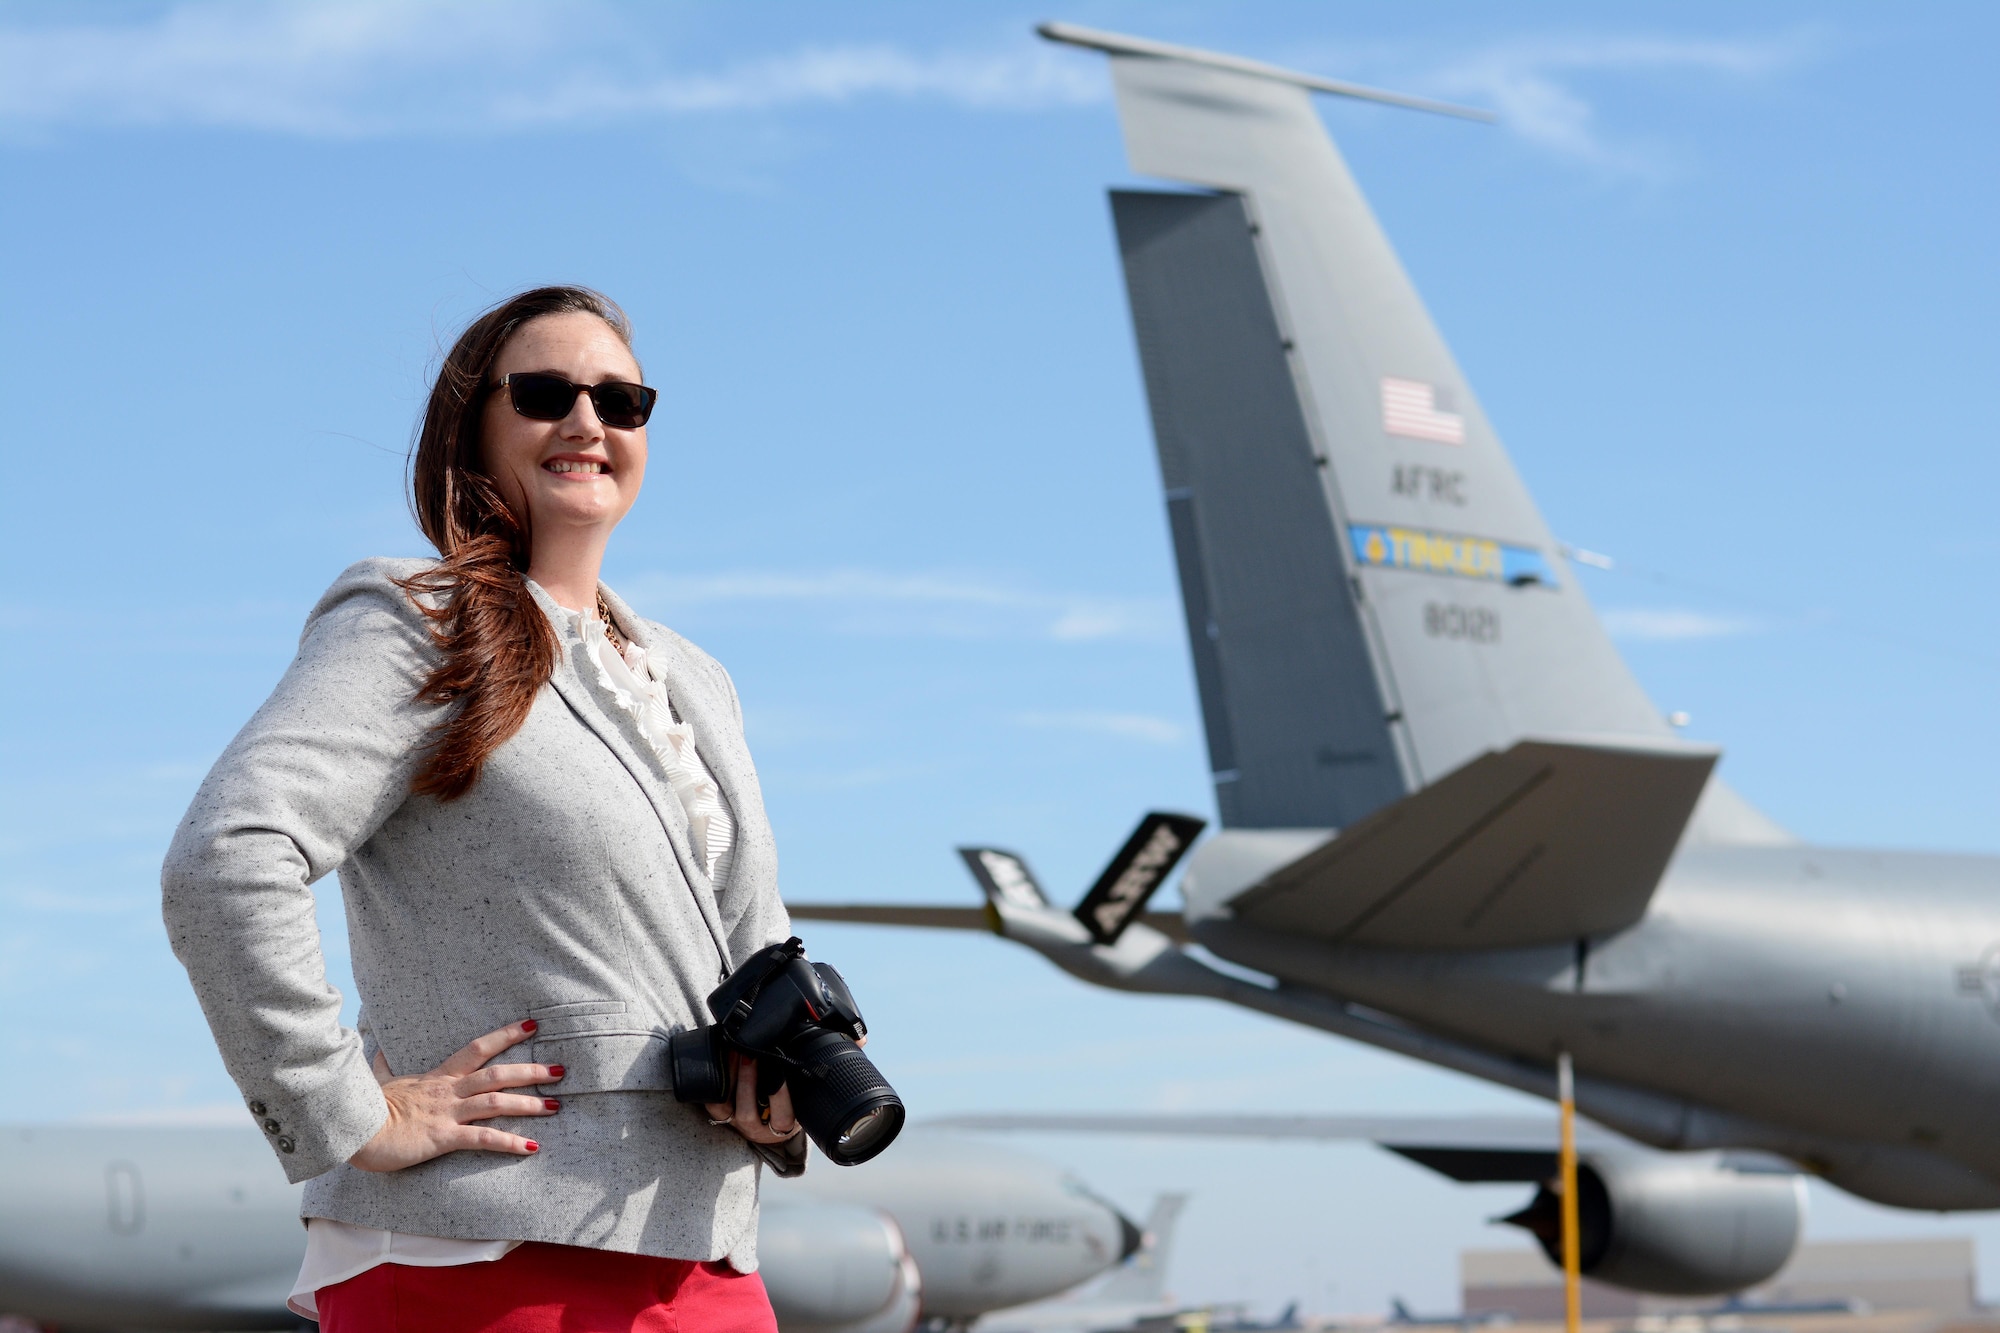 Lauren Gleason, 507th Air Refueling Wing Public Affairs specialist, poses for a photo at Tinker Air Force Base, Okla., Nov. 17, 2017. Gleason was awarded the Air Force Reserve Command Outstanding Communication Civilian, Civilian Category II, award for 2017. An Air Force veteran of 14 years, Gleason has worked for the 507th ARW for four years simultaneously as a civilian and a Reservist. (U.S. Air Force photo/Tech. Sgt. Samantha Mathison)